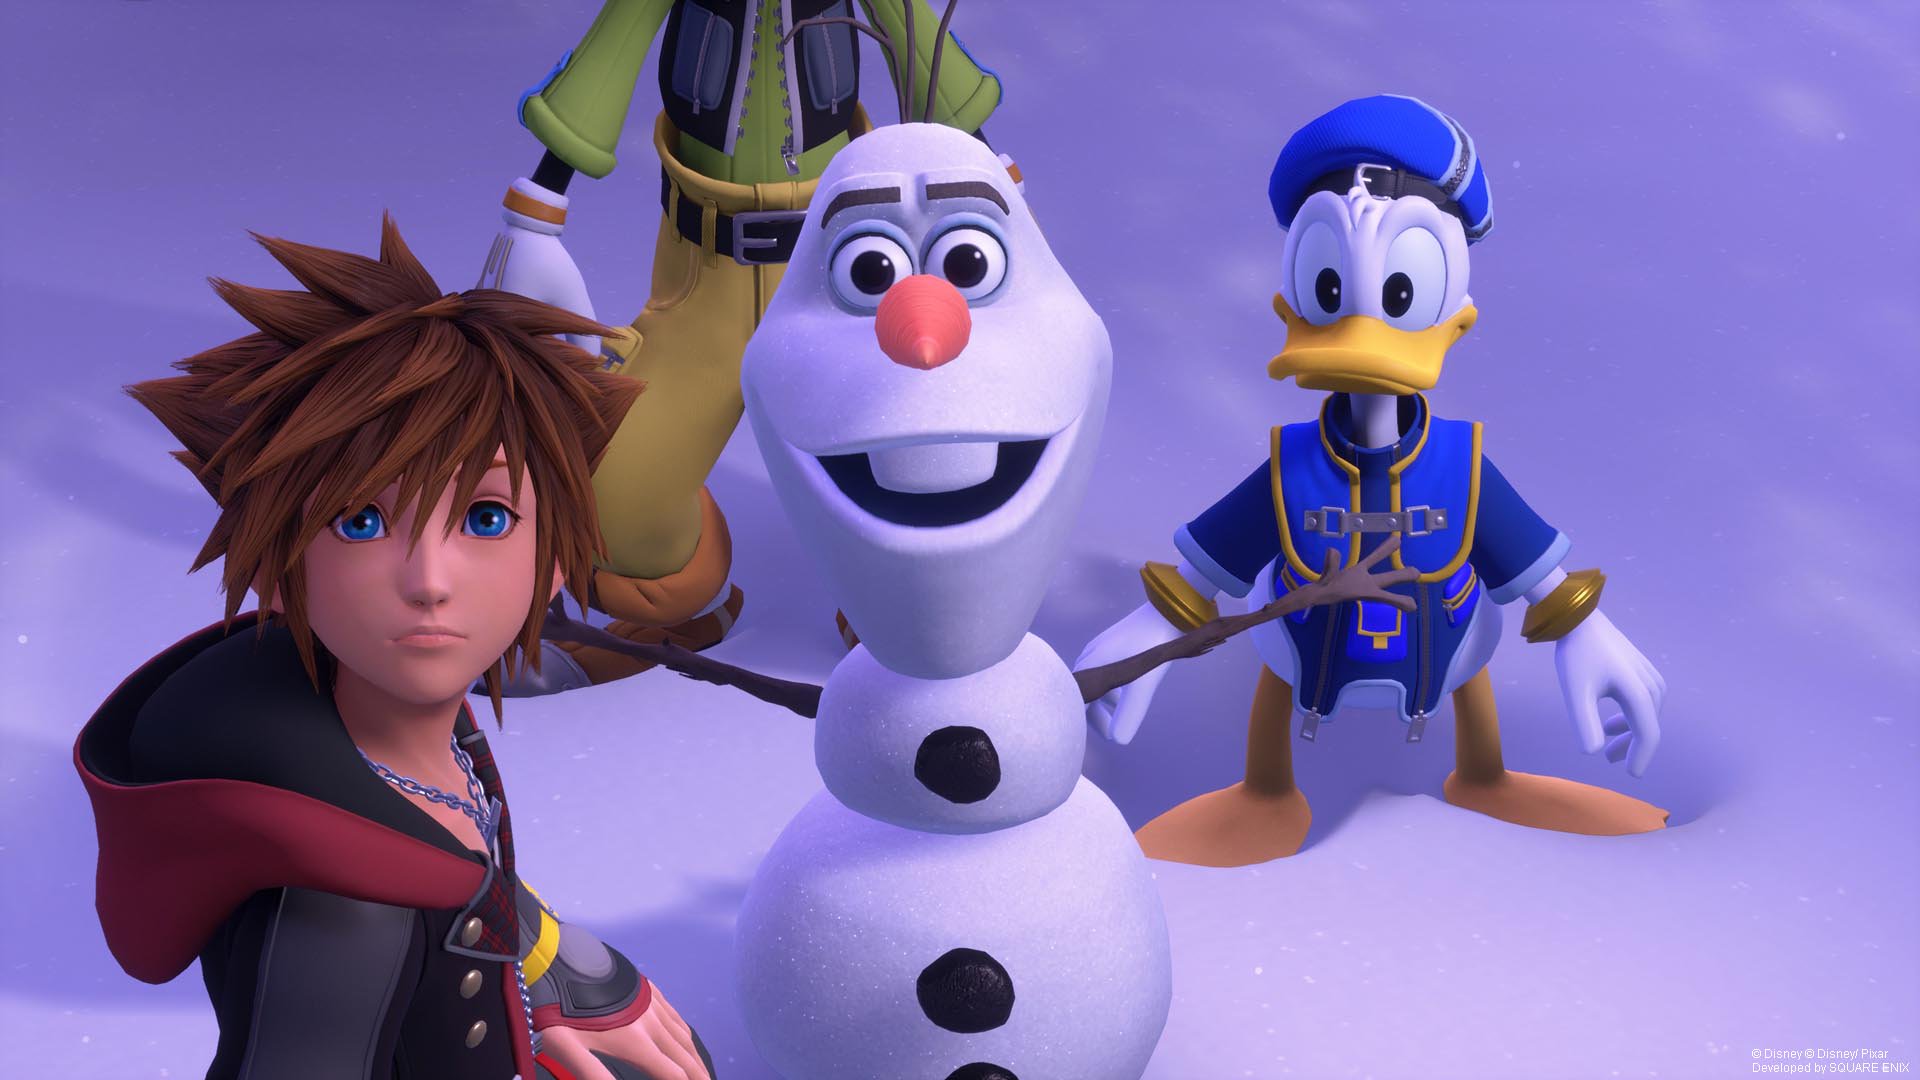 Should You Play All The Kingdom Hearts Games?